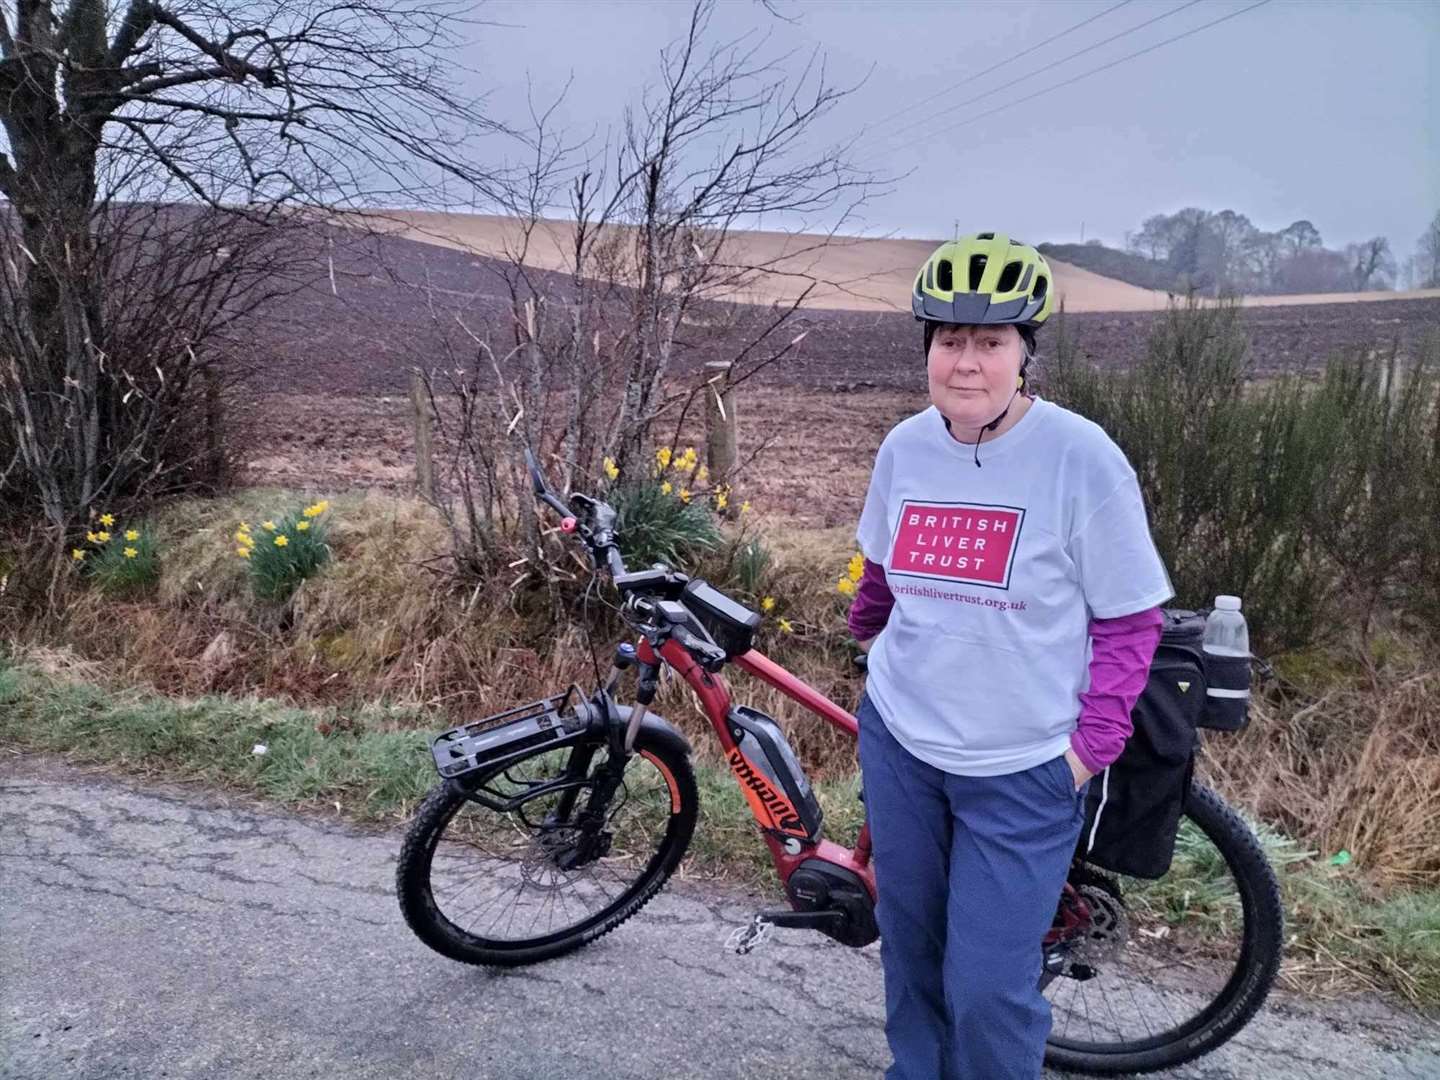 Yvonne Marsay, who stays in Grange near Keith, is cycling from Lands' End to John O' Groats to raise money for the British Liver Trust.